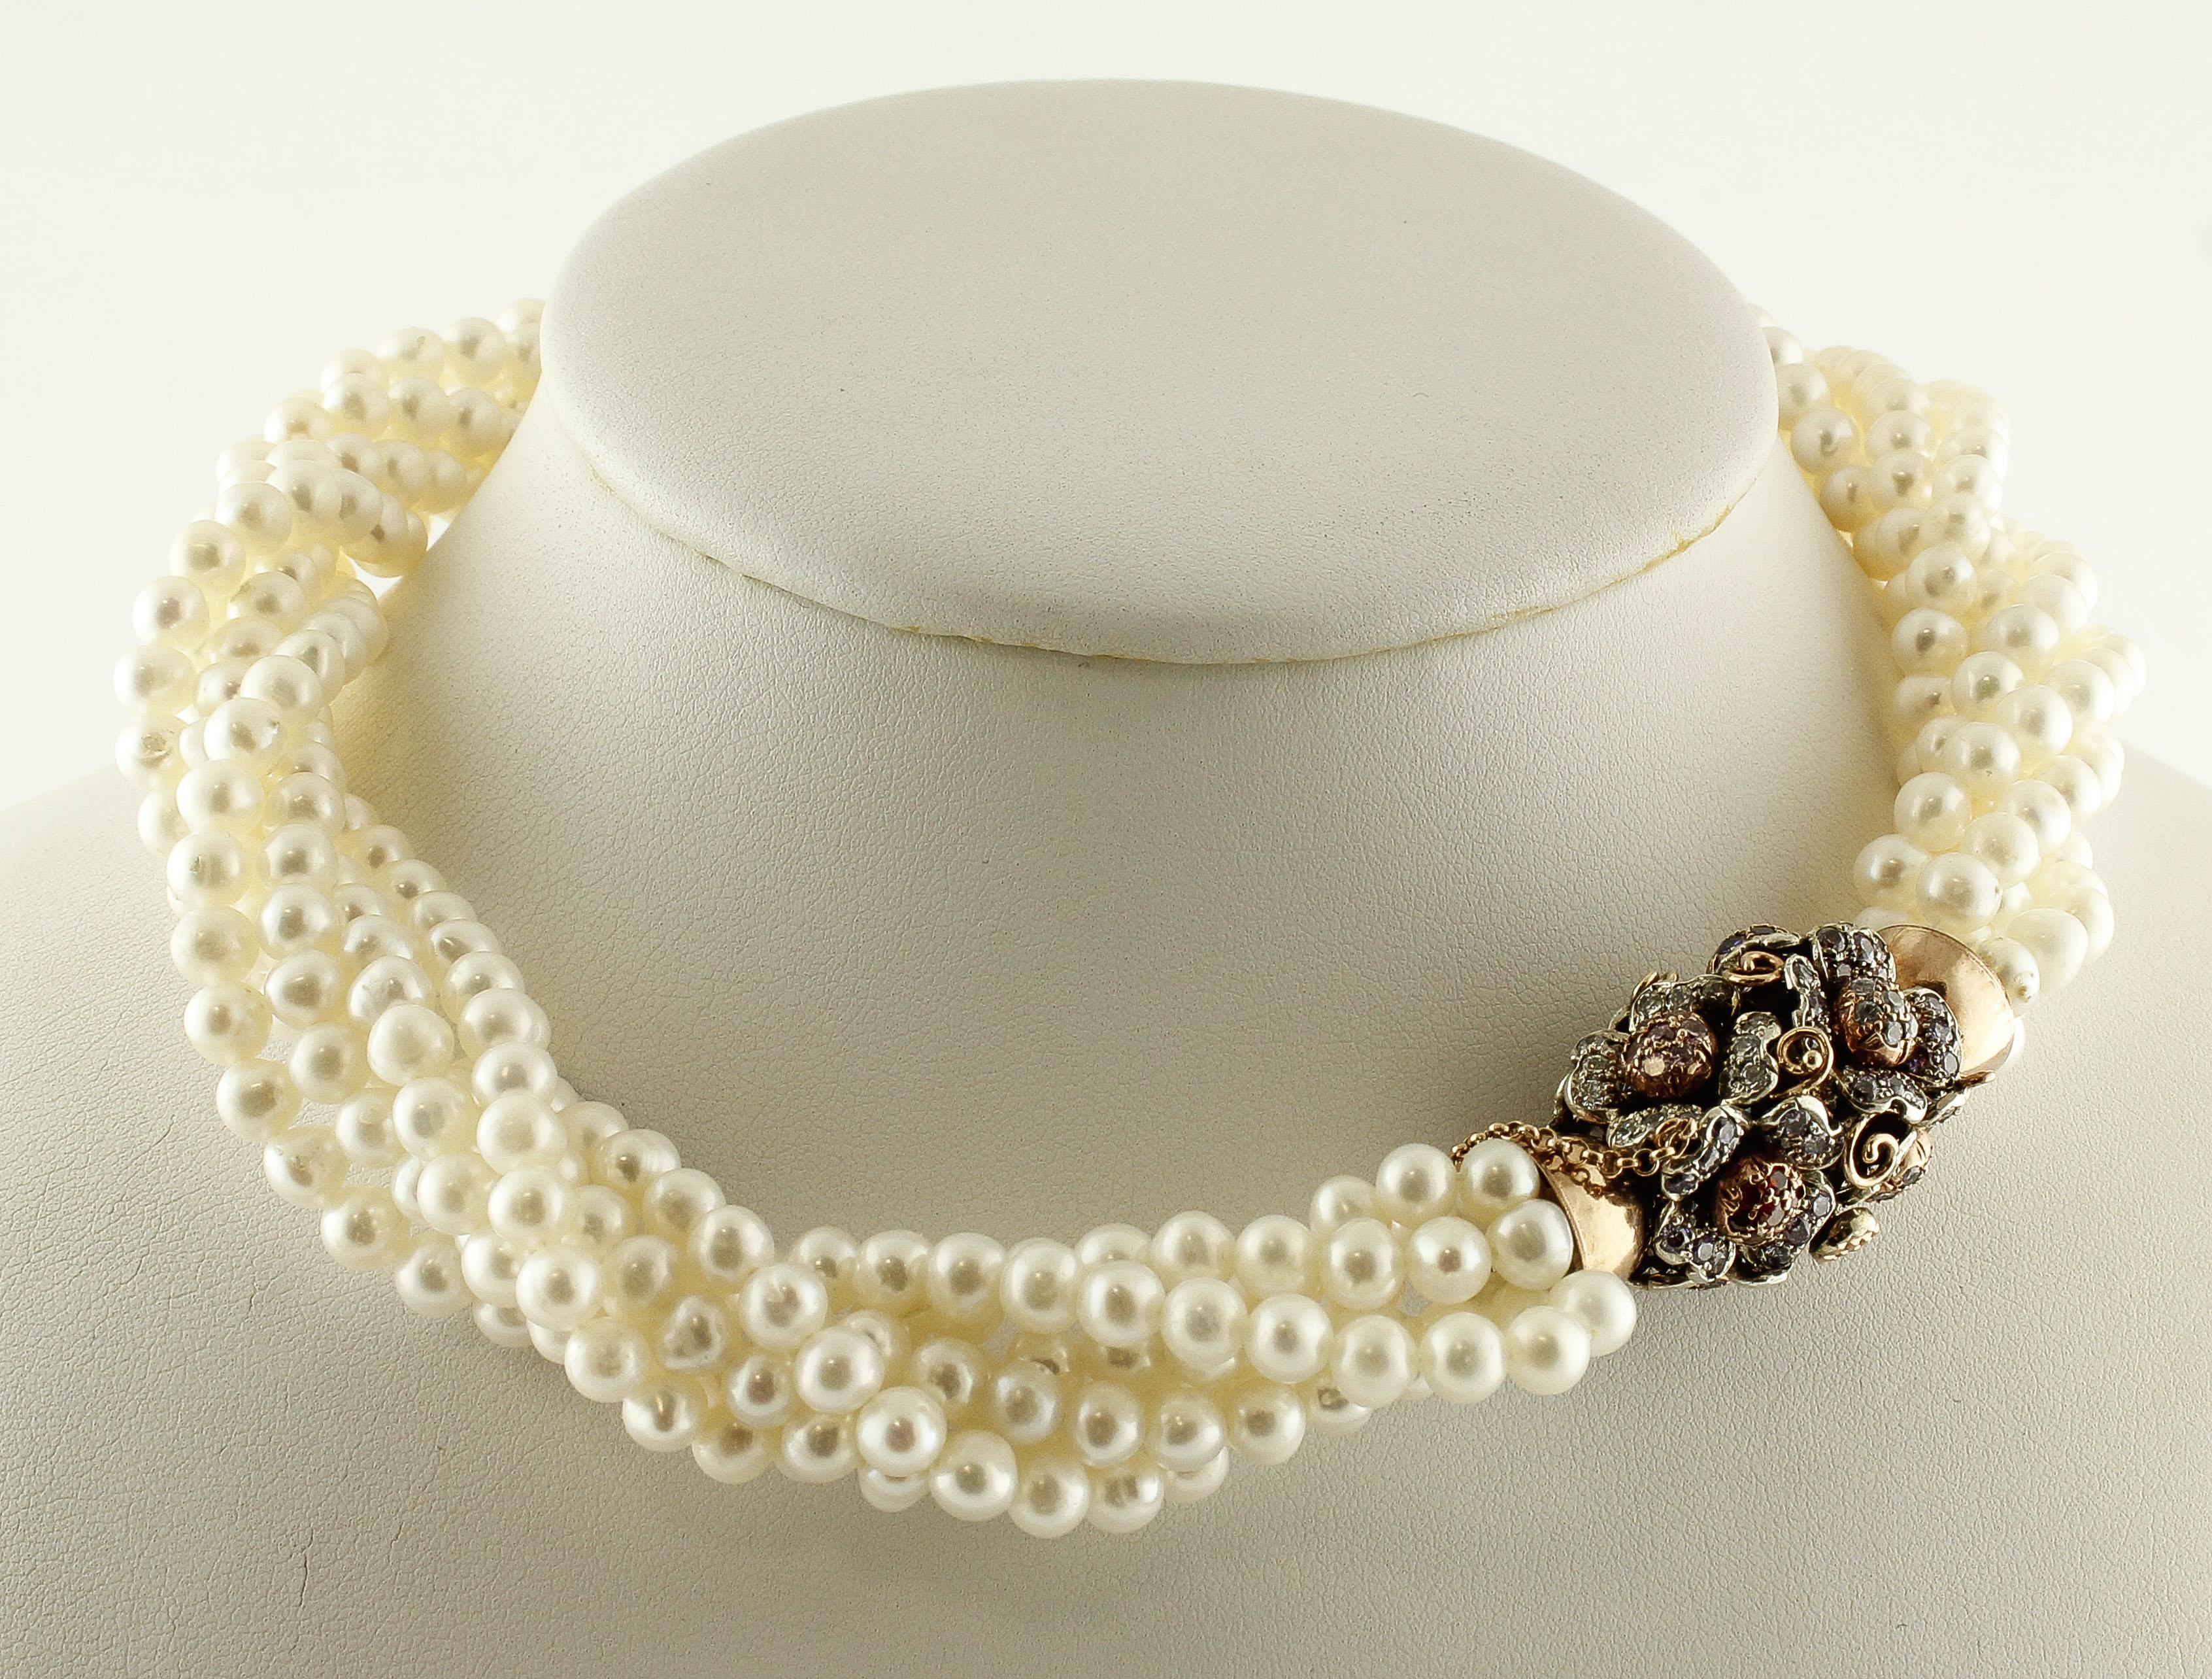 Elegant beaded necklace composed of 97.37 g of 6 white pearls rows that intertwine with each other; and 9K rose gold and silver flower theme closure adorned with 3.13 g of multi-color hard stones.
Multi-Color Hard Stones 3.13 g 
Pearls 97.37 g   / 6